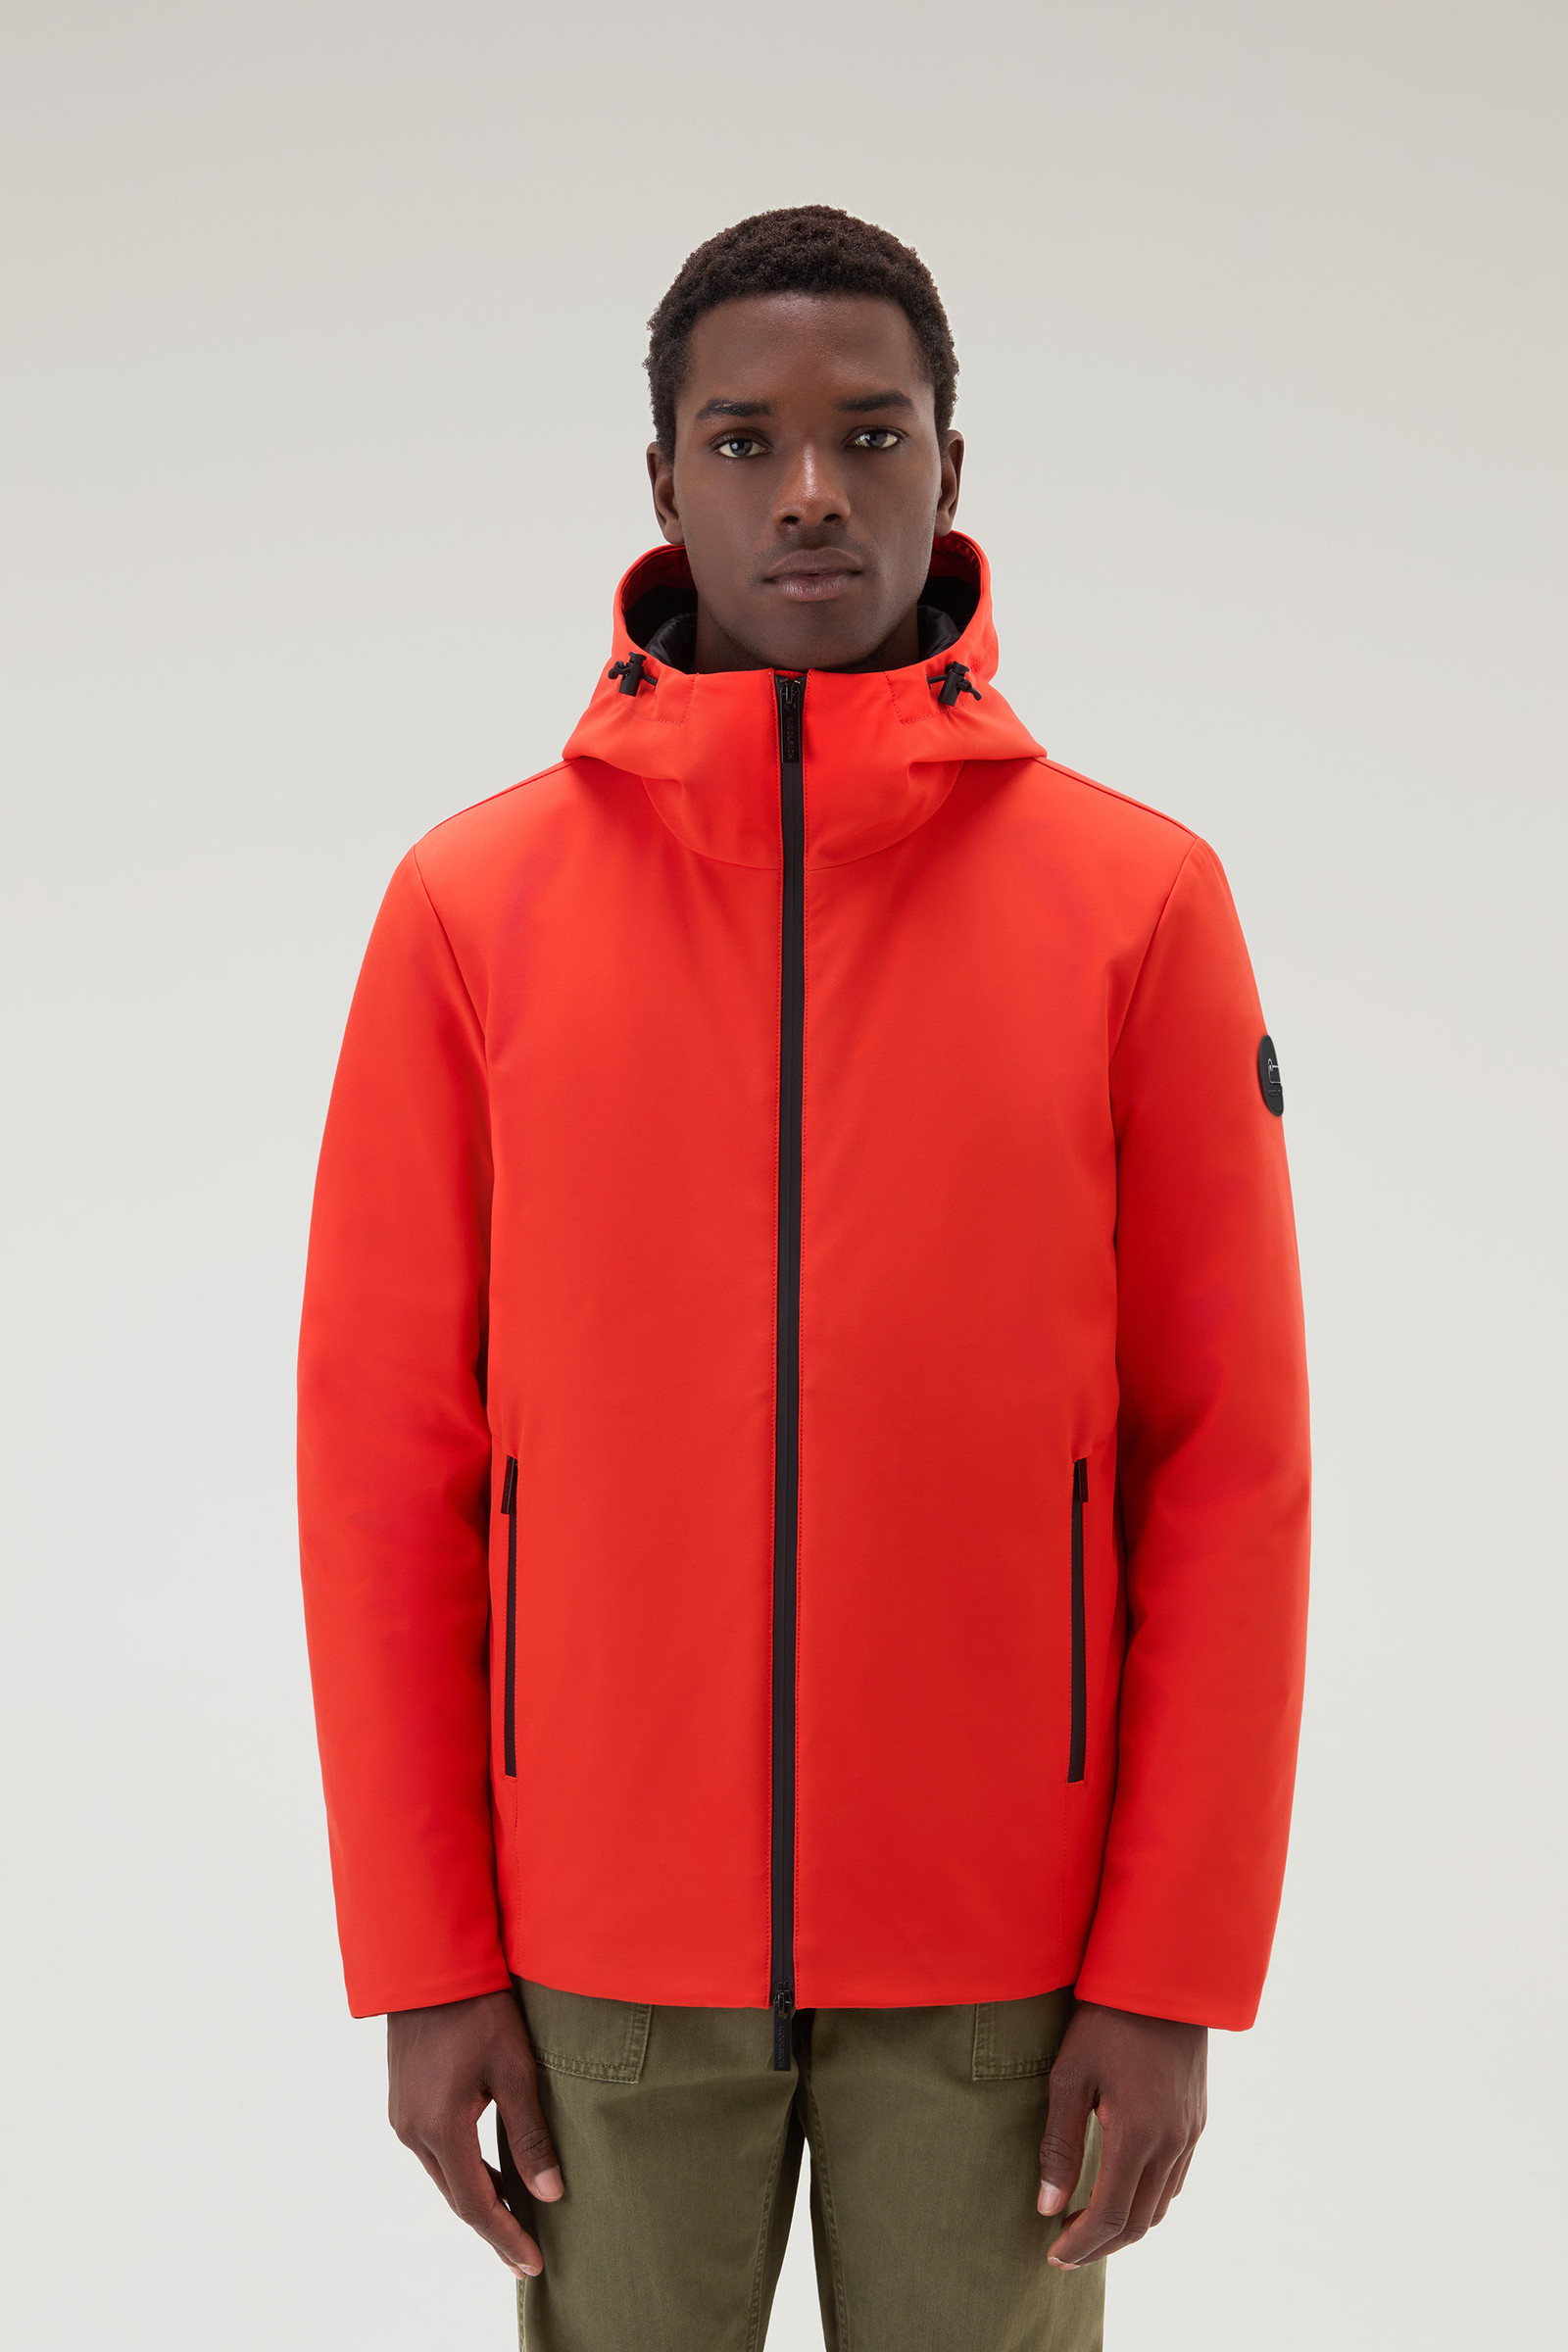 Pacific Jacket in Tech Softshell Orange | Woolrich USA